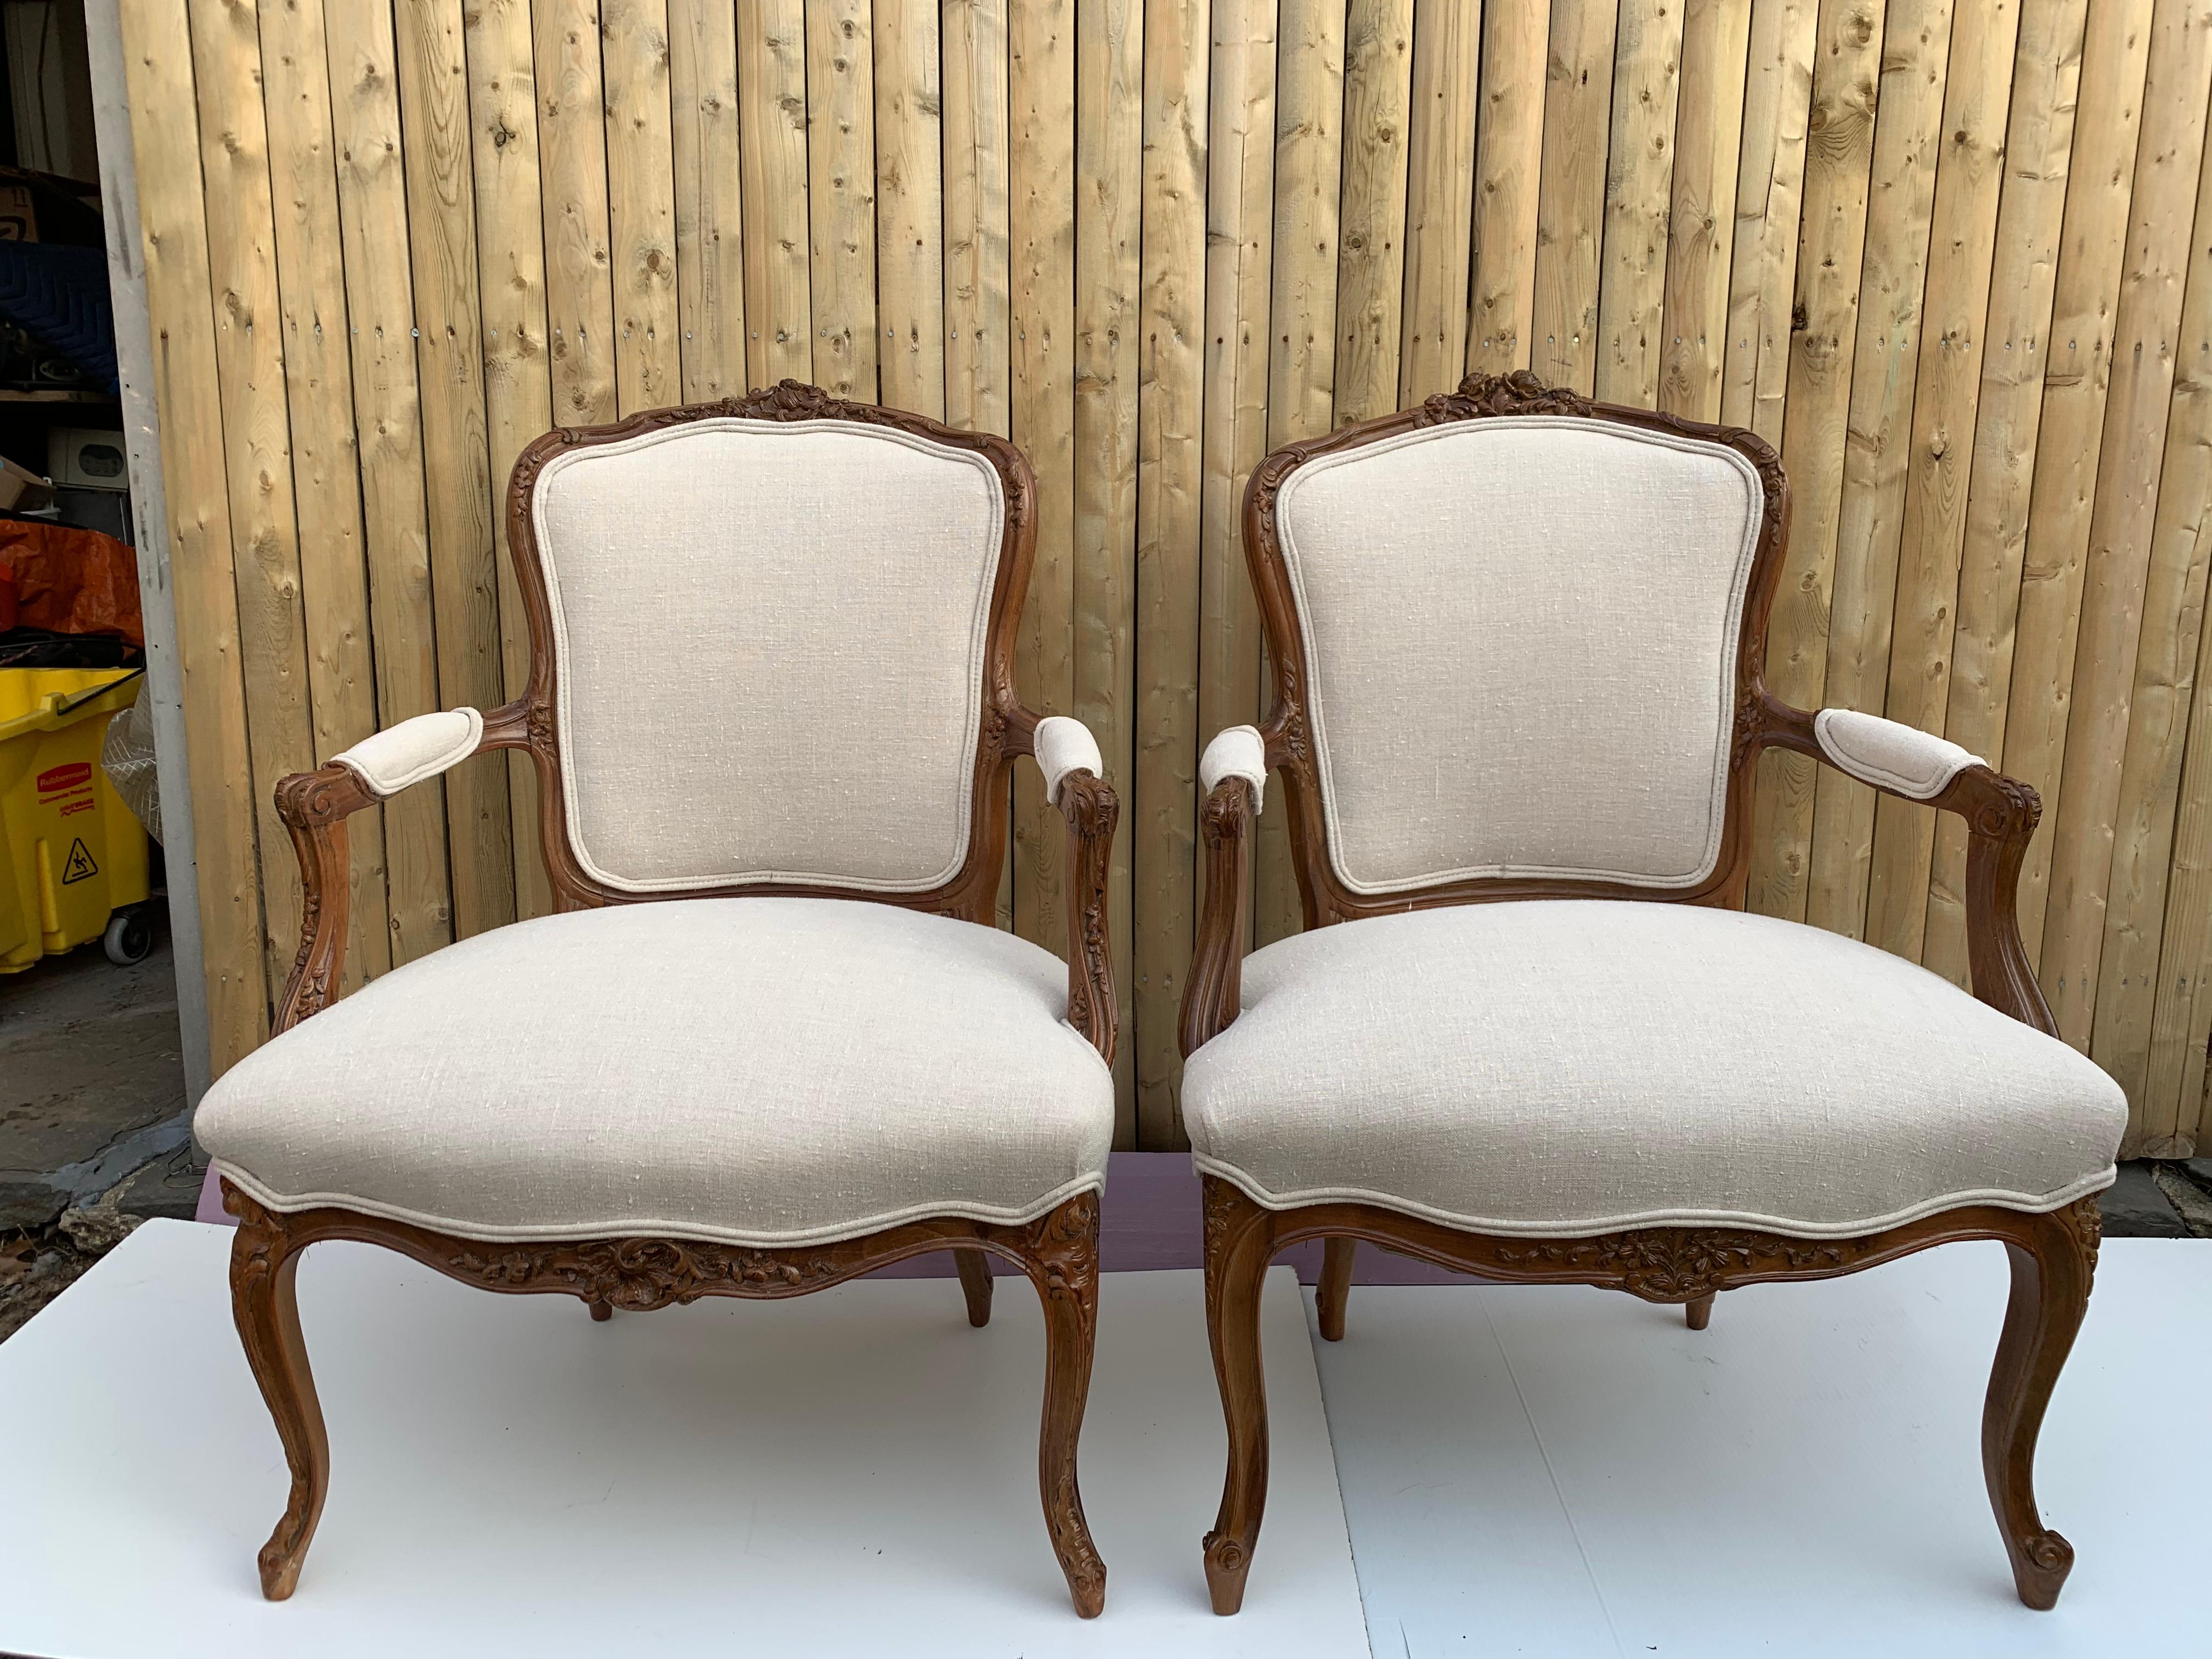 Pair of vintage carved French bergère chairs, fully refinished and newly and fully upholstered with new material and beautiful fabric, these 2 arm chairs Fauteuils  are exact same chairs in size with subtle carving differences.